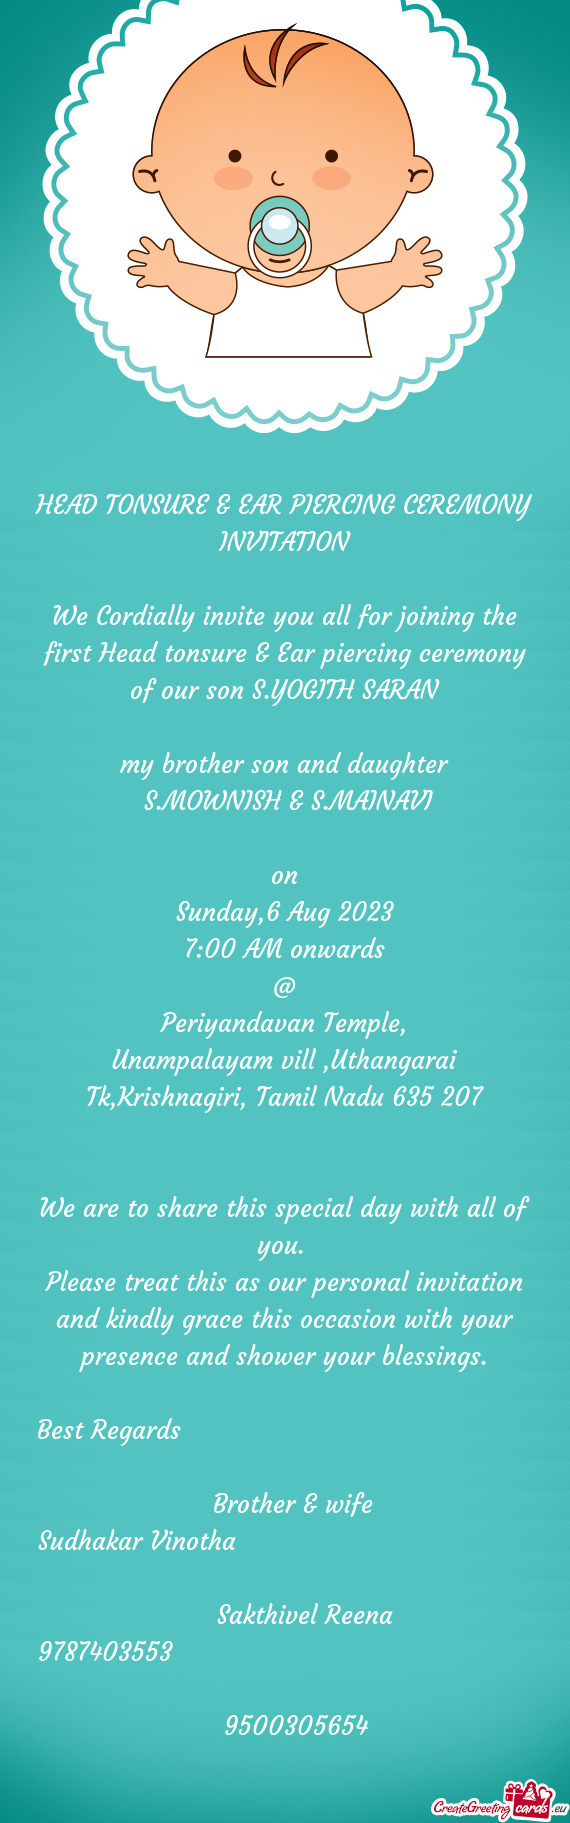 We Cordially invite you all for joining the first Head tonsure & Ear piercing ceremony of our son S